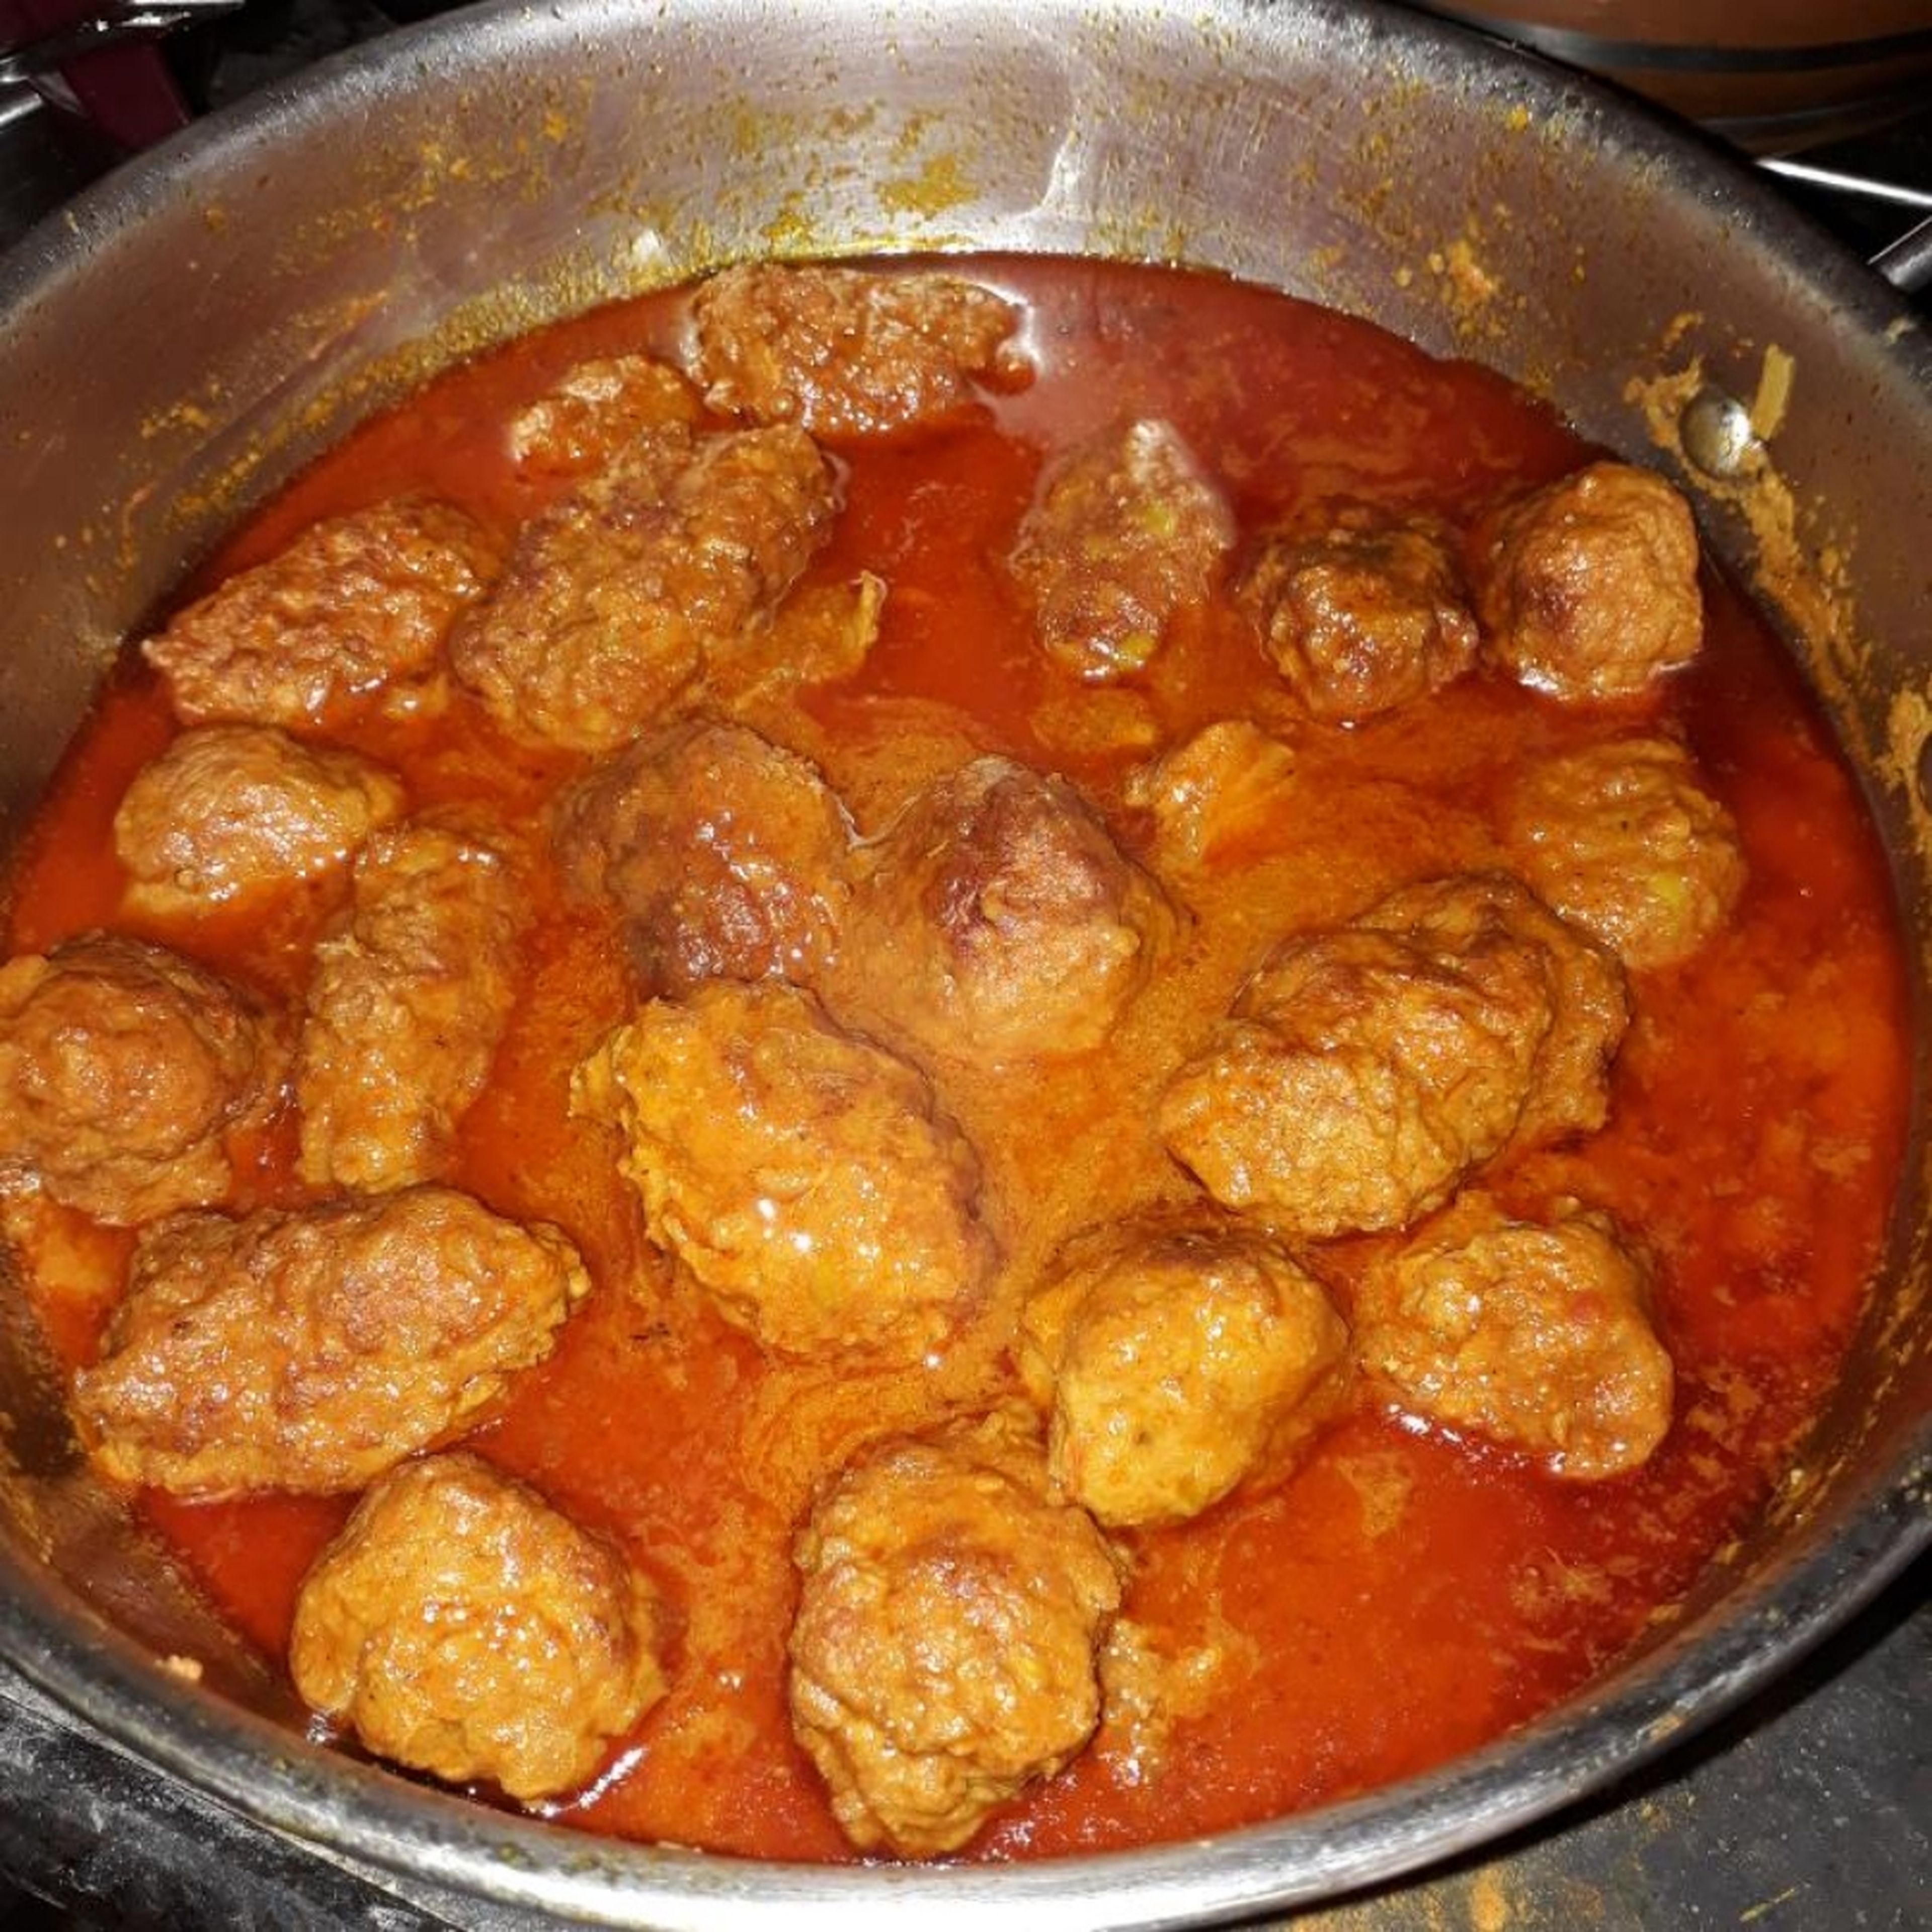 cook for 30 minutes on simmer flame.. deliciousmutton kheema kofta curry is Ready..